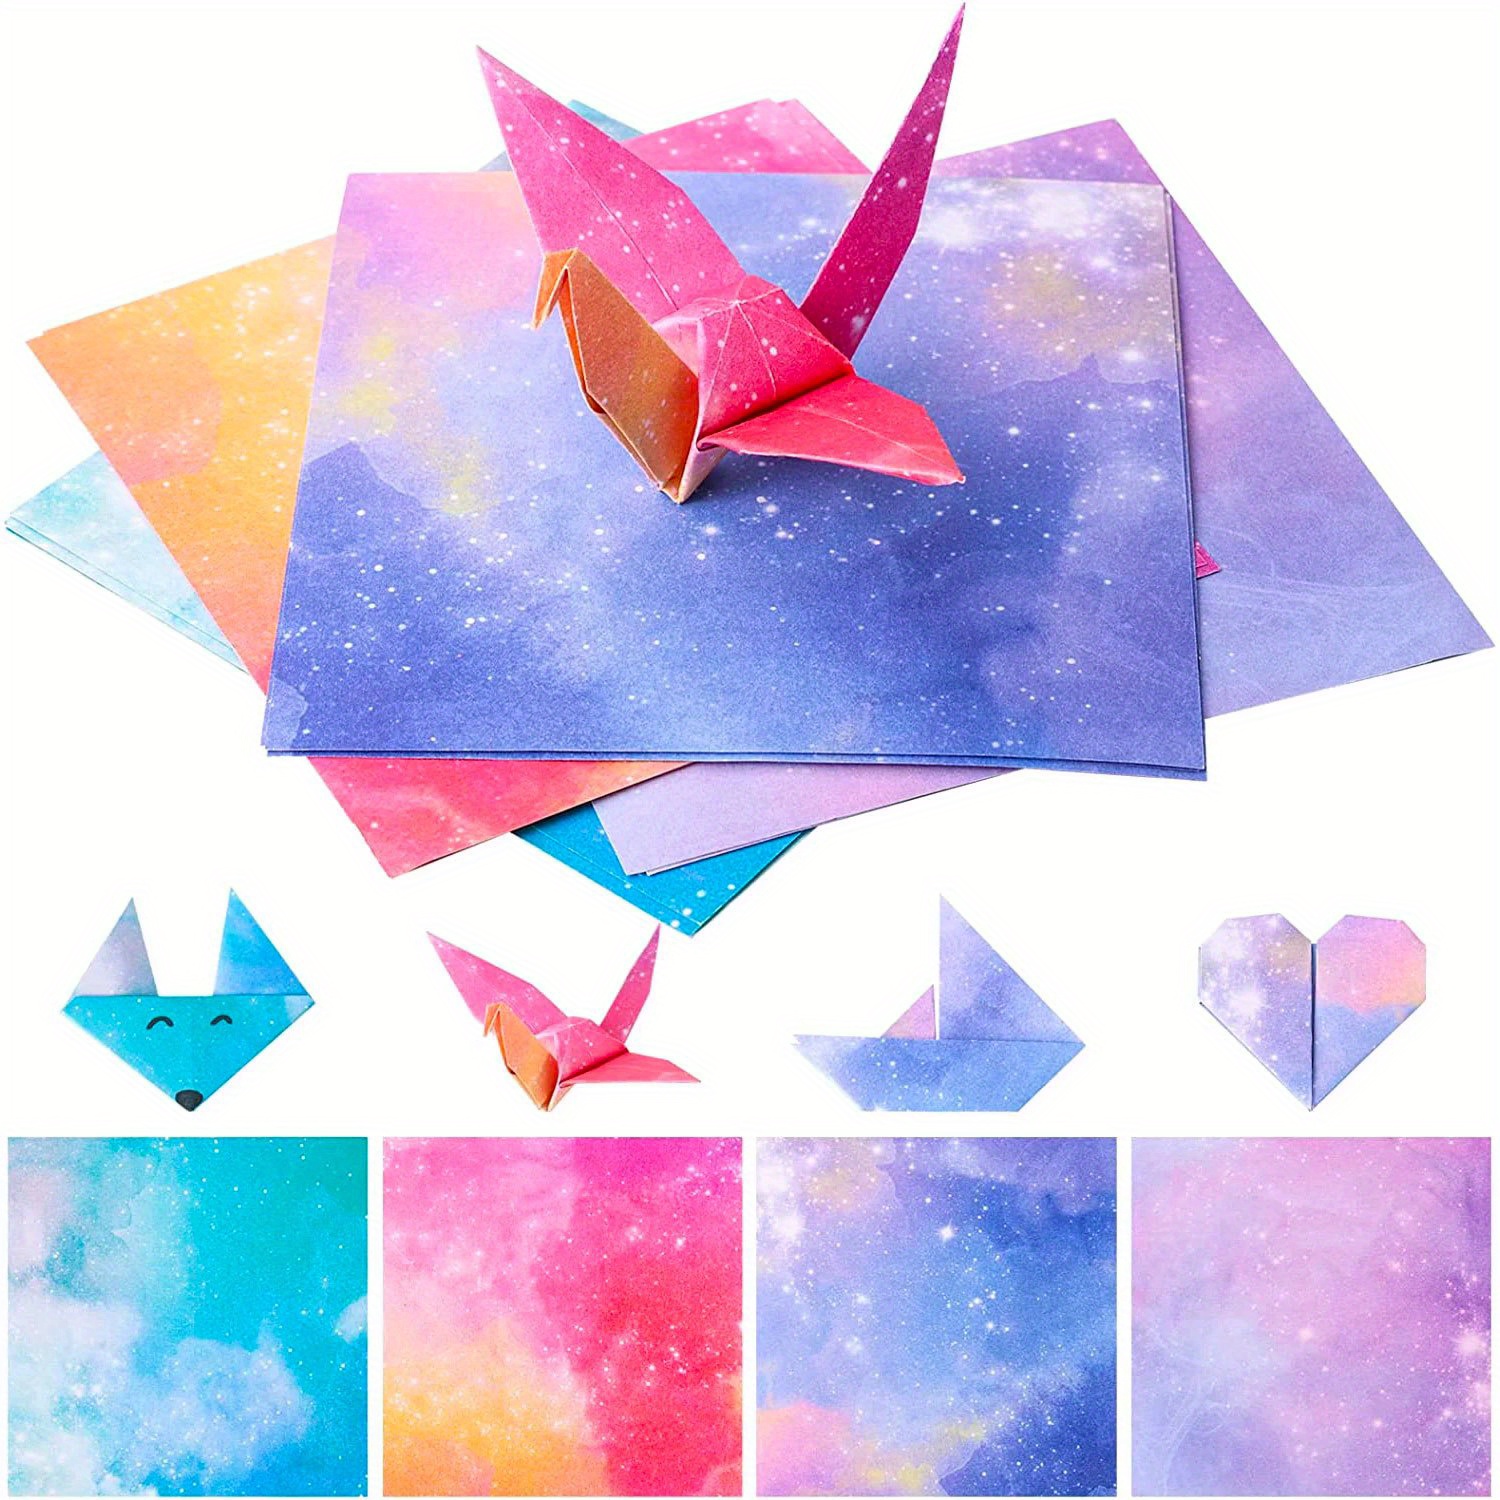 10Pcs Shrink Art Paper: Create Unique Crafts & Accessories with Shrinky  Dink Paper!